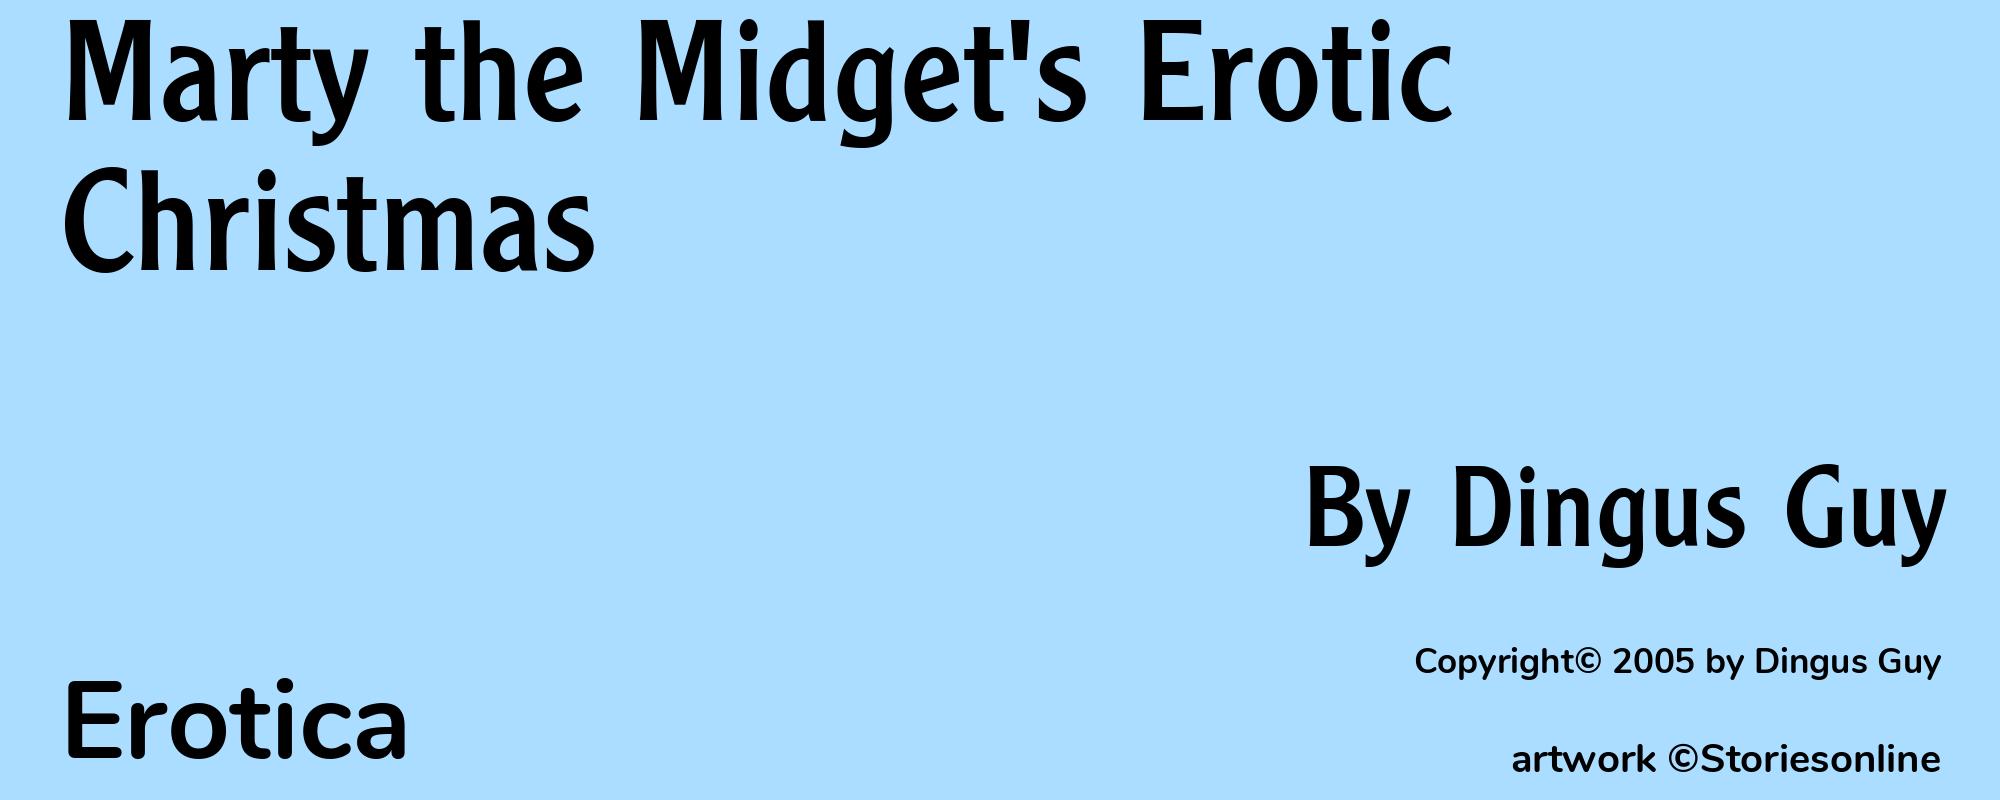 Marty the Midget's Erotic Christmas - Cover